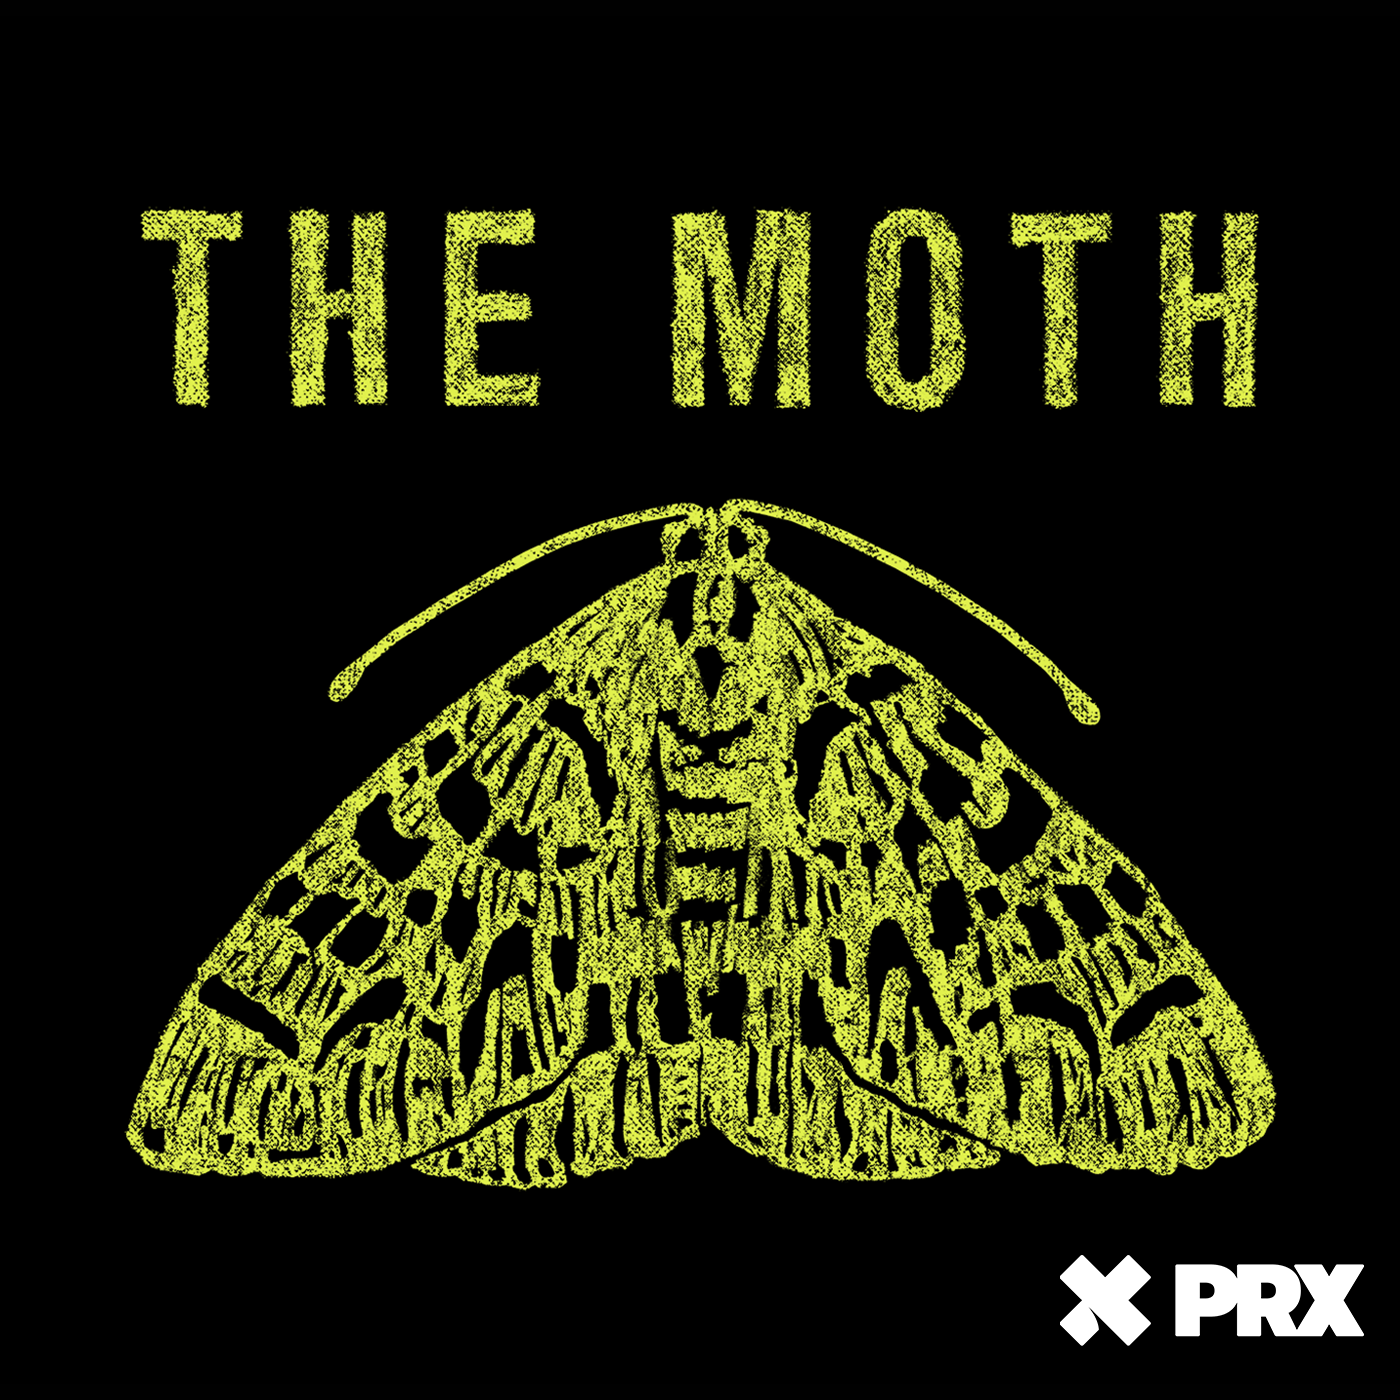 The Moth Radio Hour: Pole Vaulting, Comedy, and the Congo